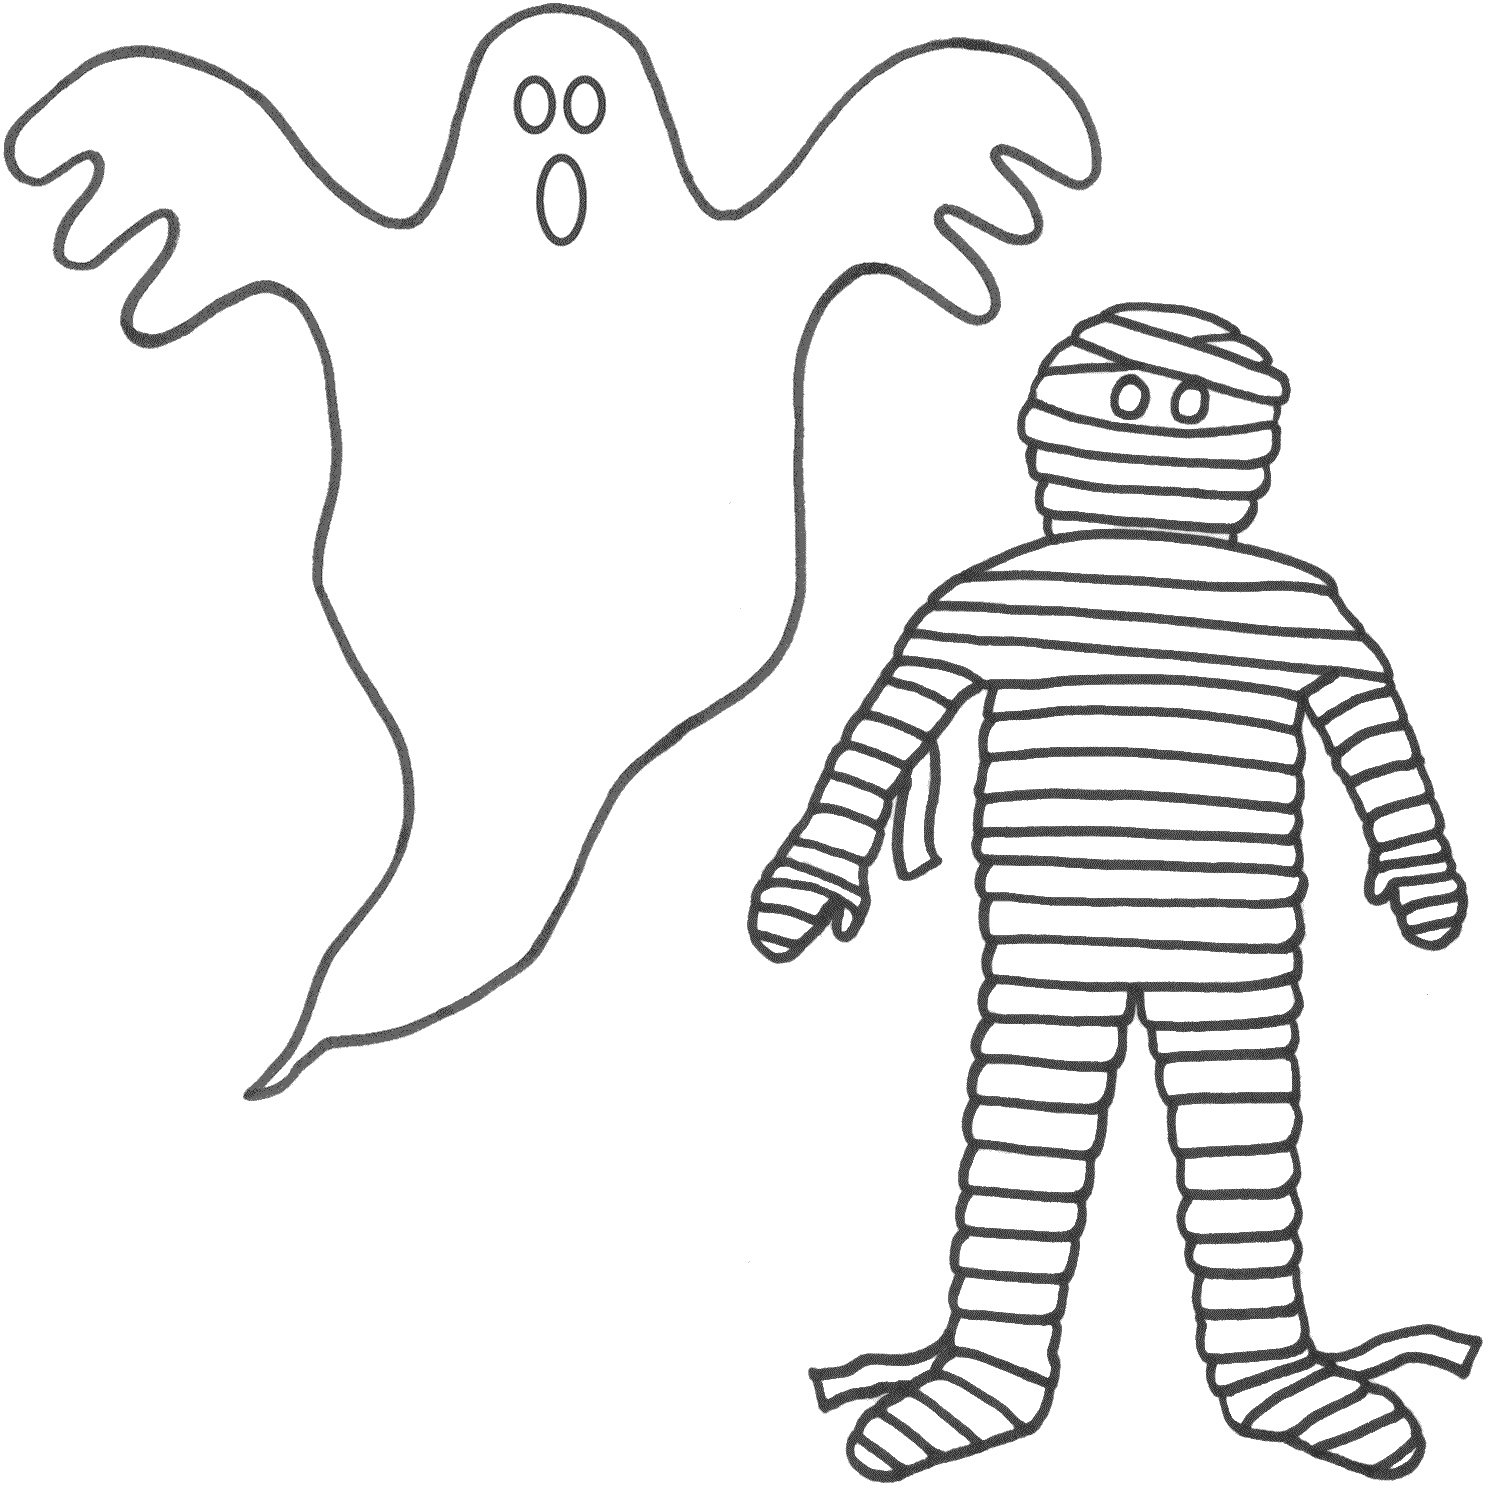 Ghost Coloring Pages Ghost Coloring Pages Ghostbusters Coloring ...